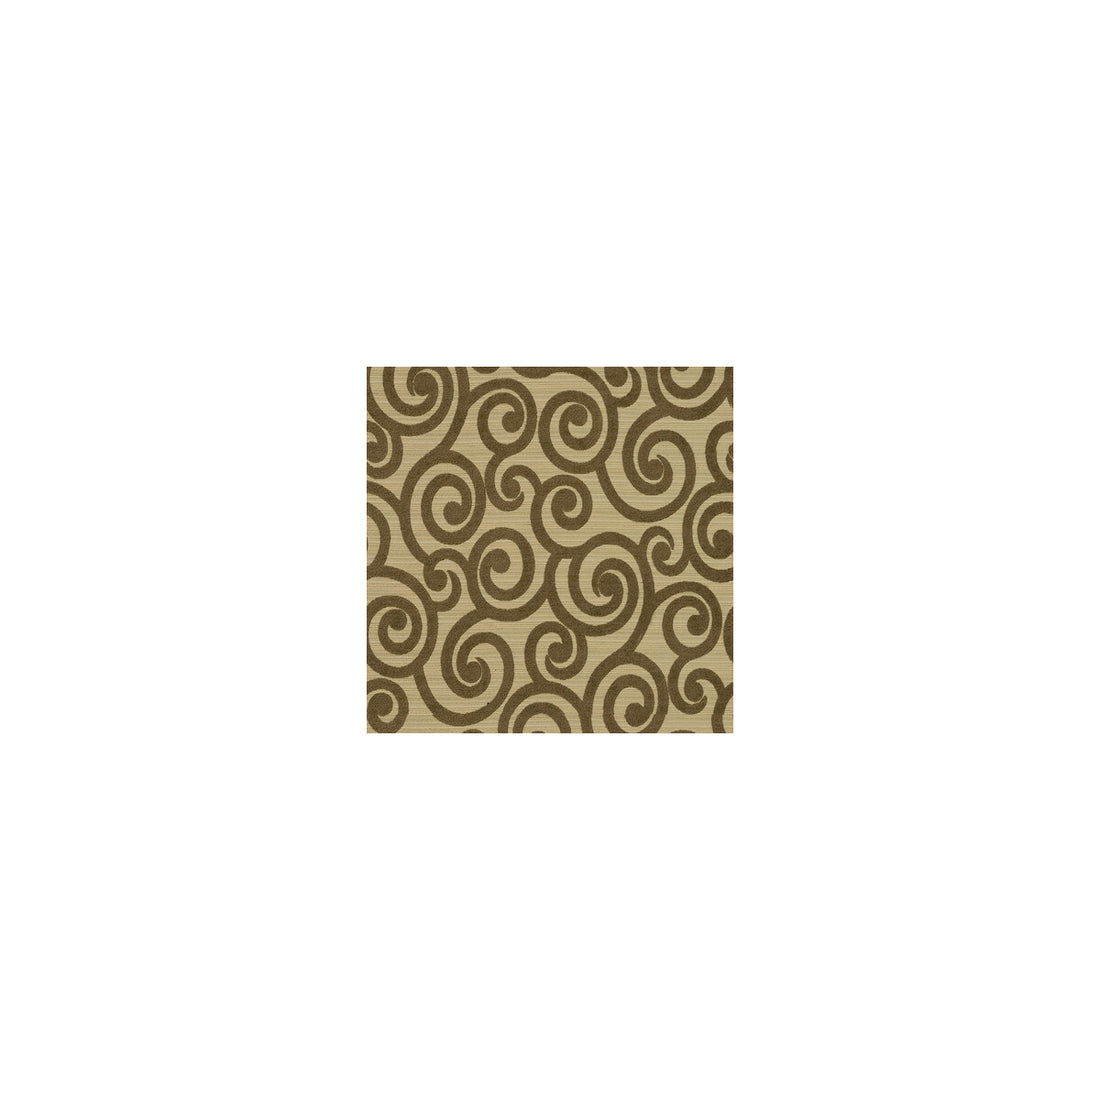 Oneida fabric in suede color - pattern 30134.616.0 - by Kravet Basics